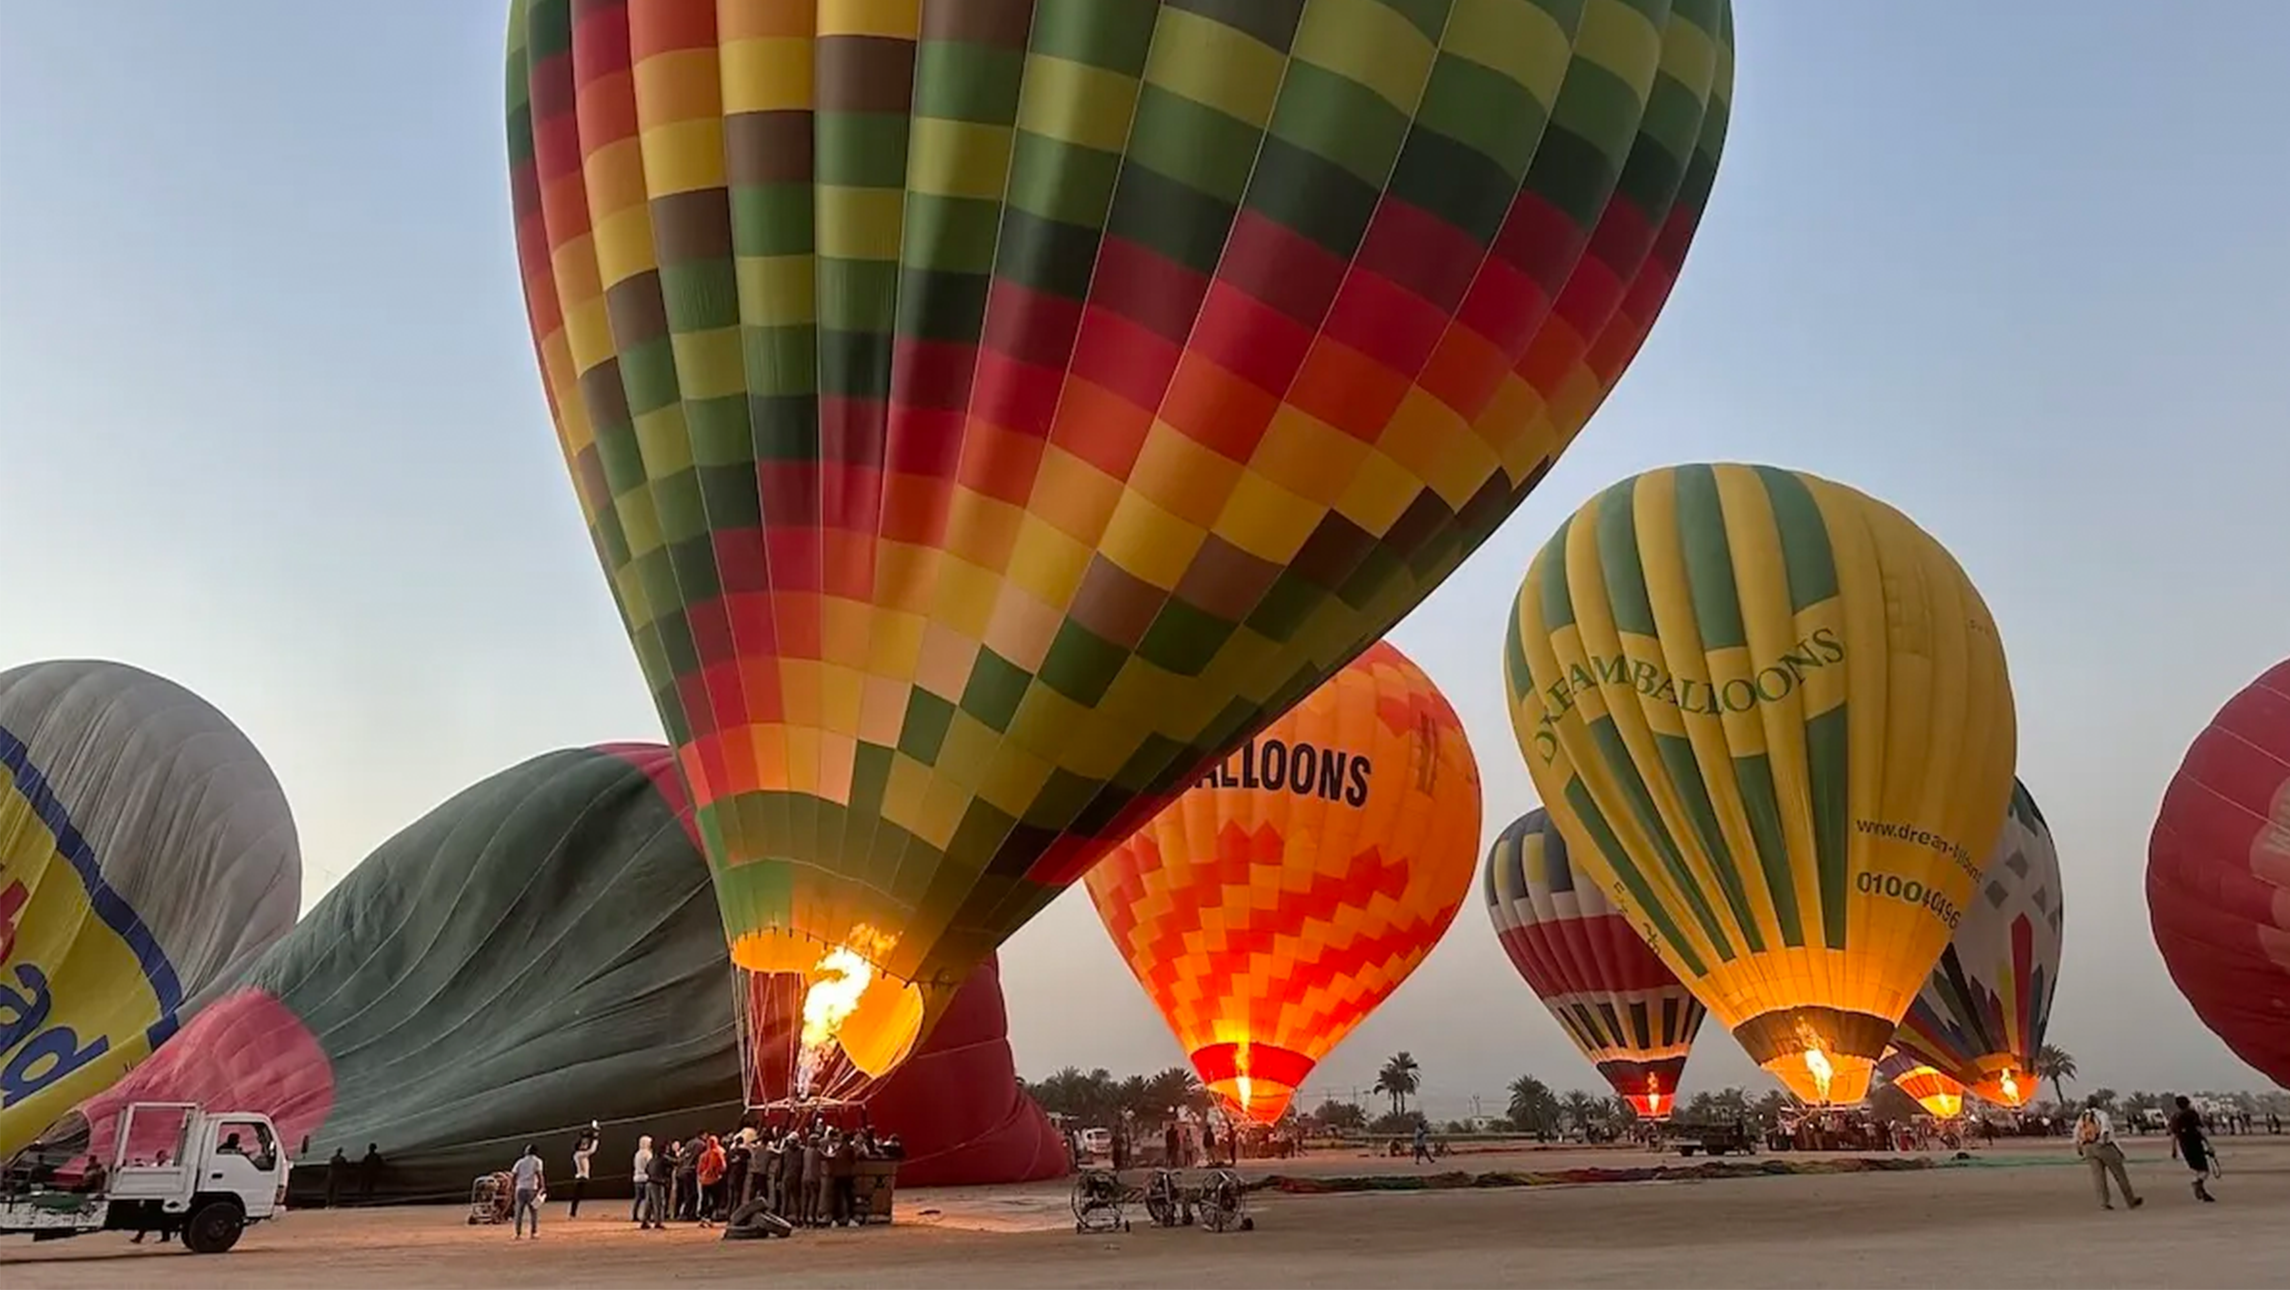 Balloons taking off at Luxor, Egypt